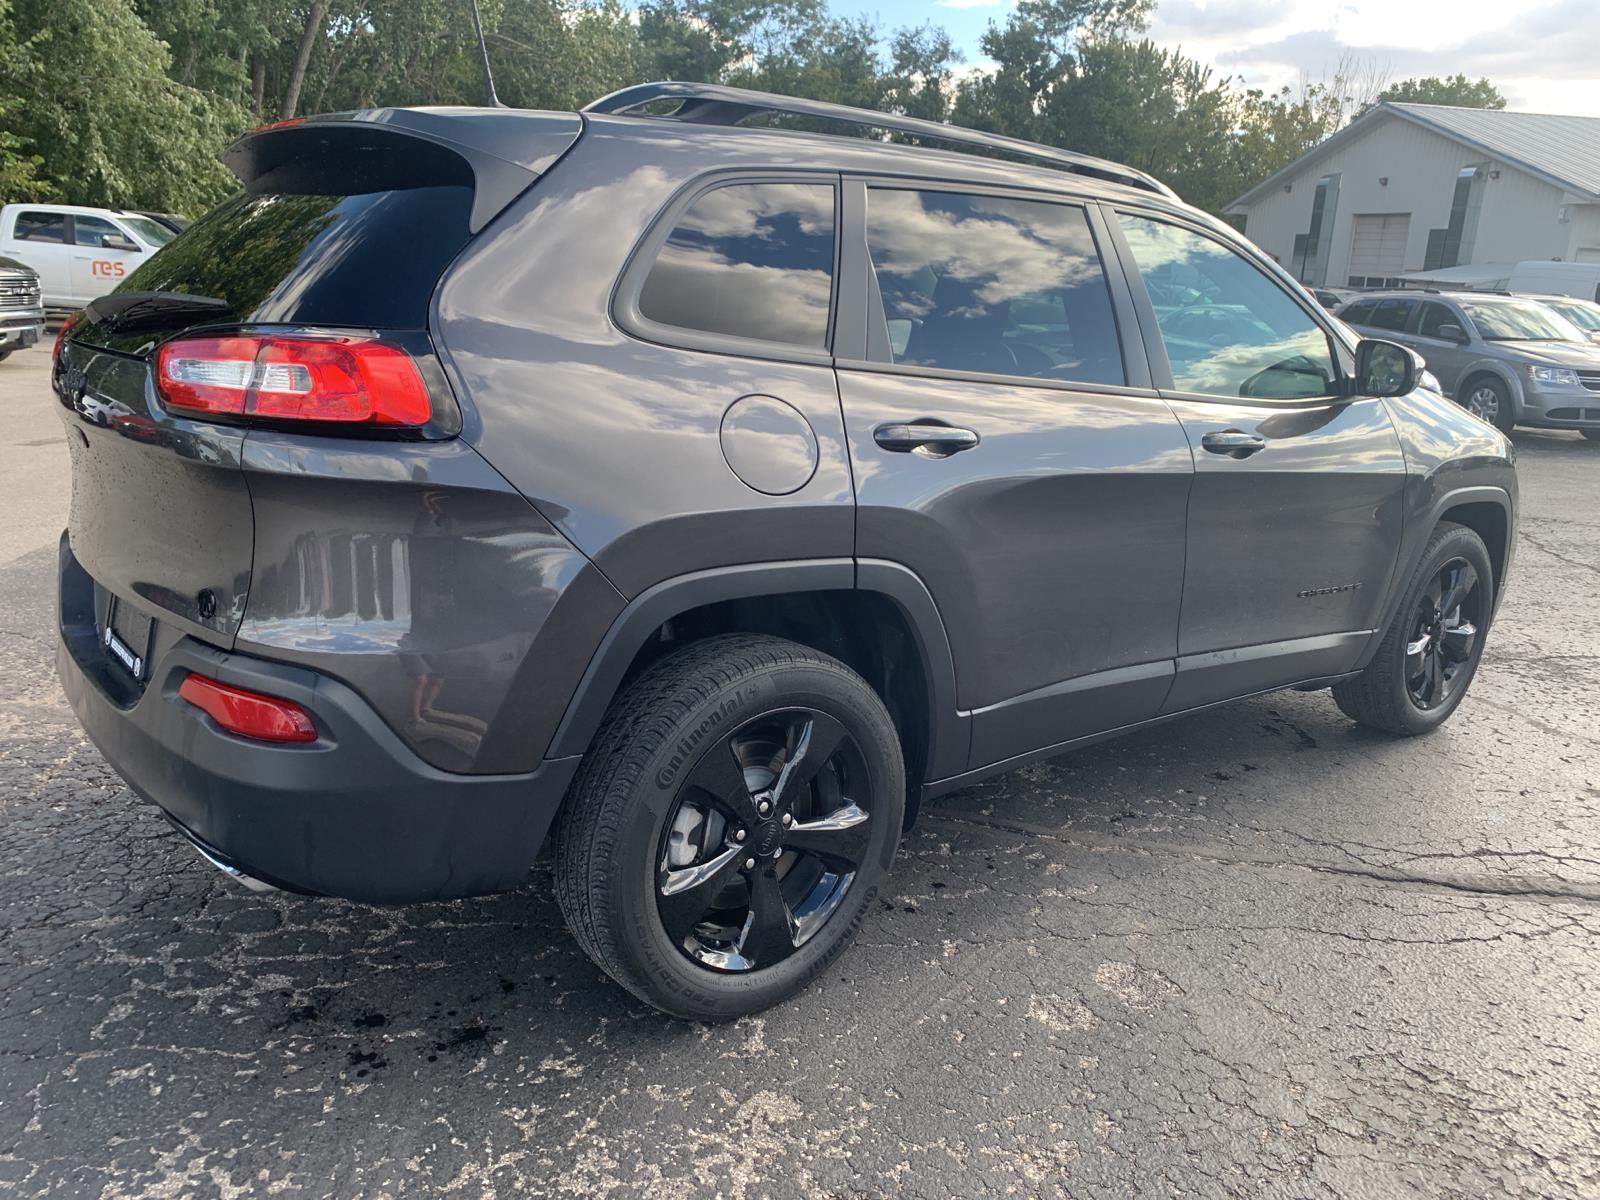 Pre-Owned 2018 Jeep Cherokee Latitude Front Wheel Drive Sport Utility Tire Size For 2018 Jeep Cherokee Latitude